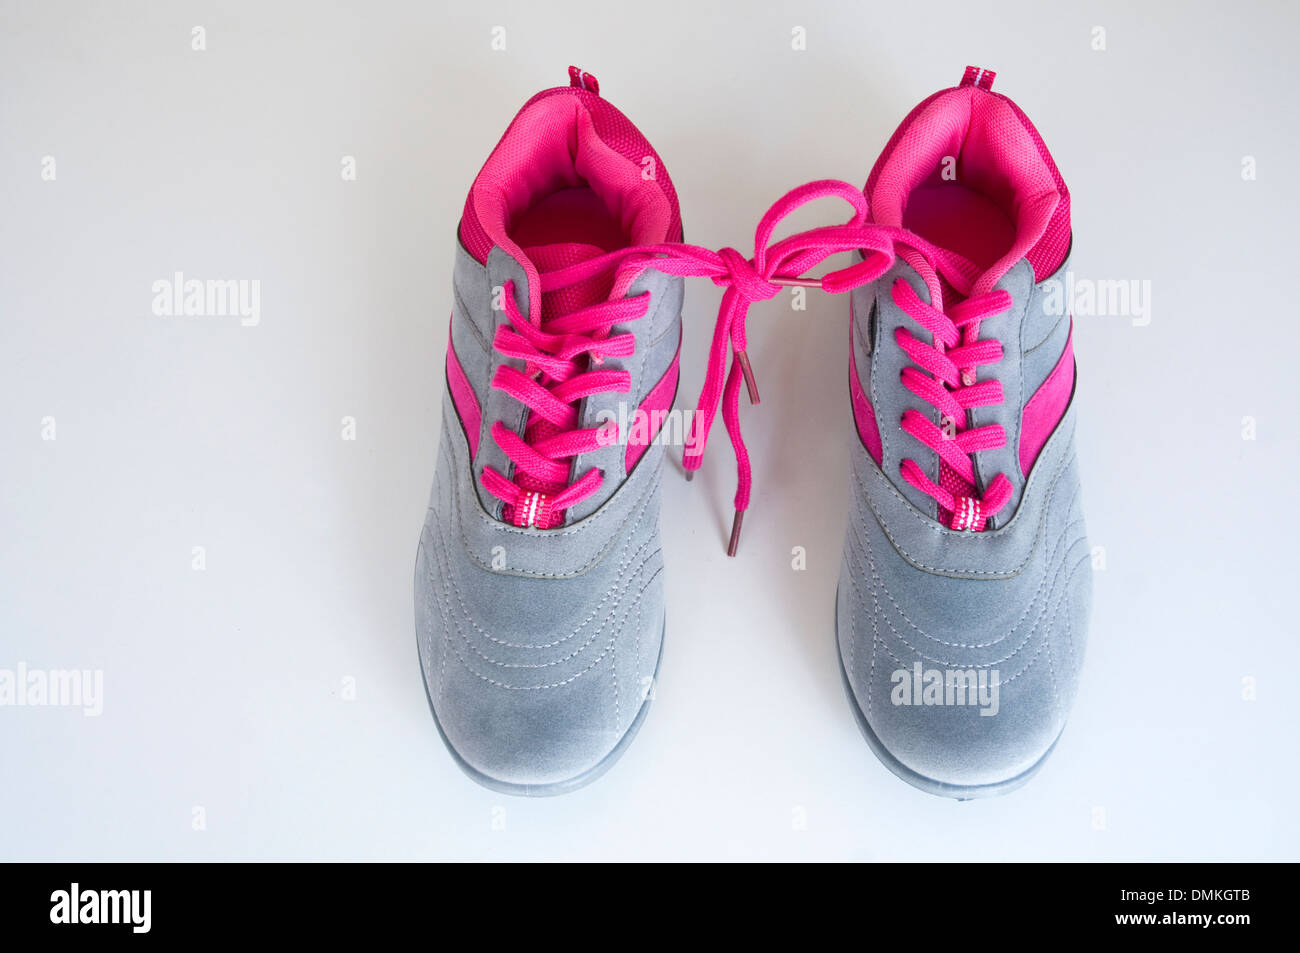 Pair of sneakers with their laces tied each other. Stock Photo